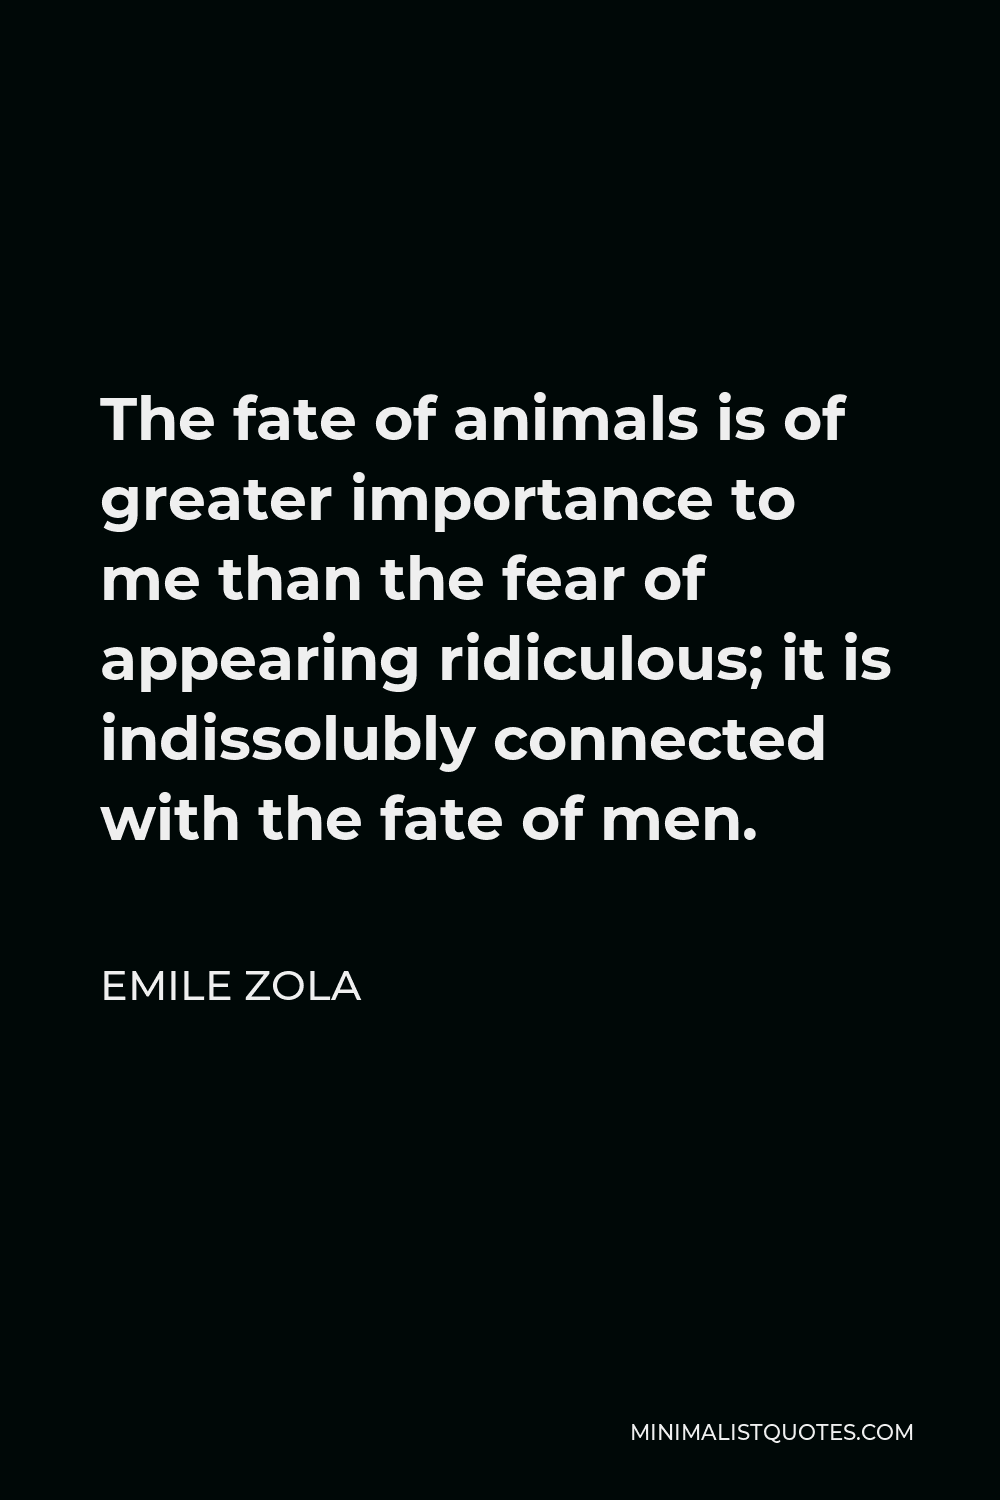 Emile Zola Quote - The fate of animals is of greater importance to me than the fear of appearing ridiculous; it is indissolubly connected with the fate of men.